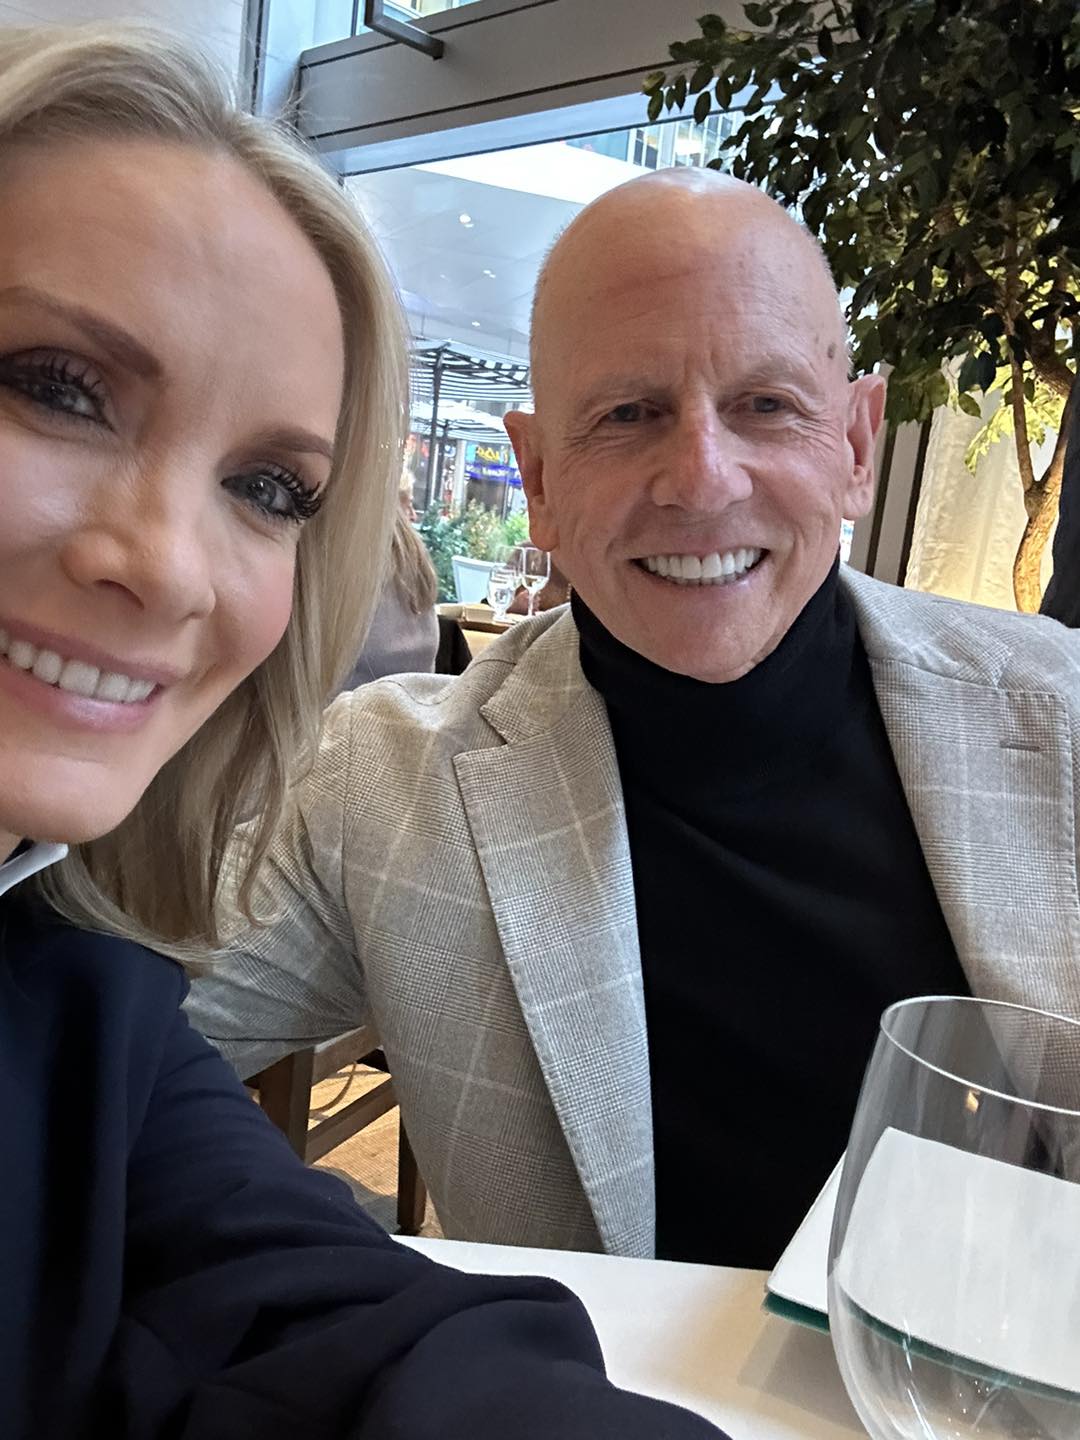 How did Perino and McMahon meet